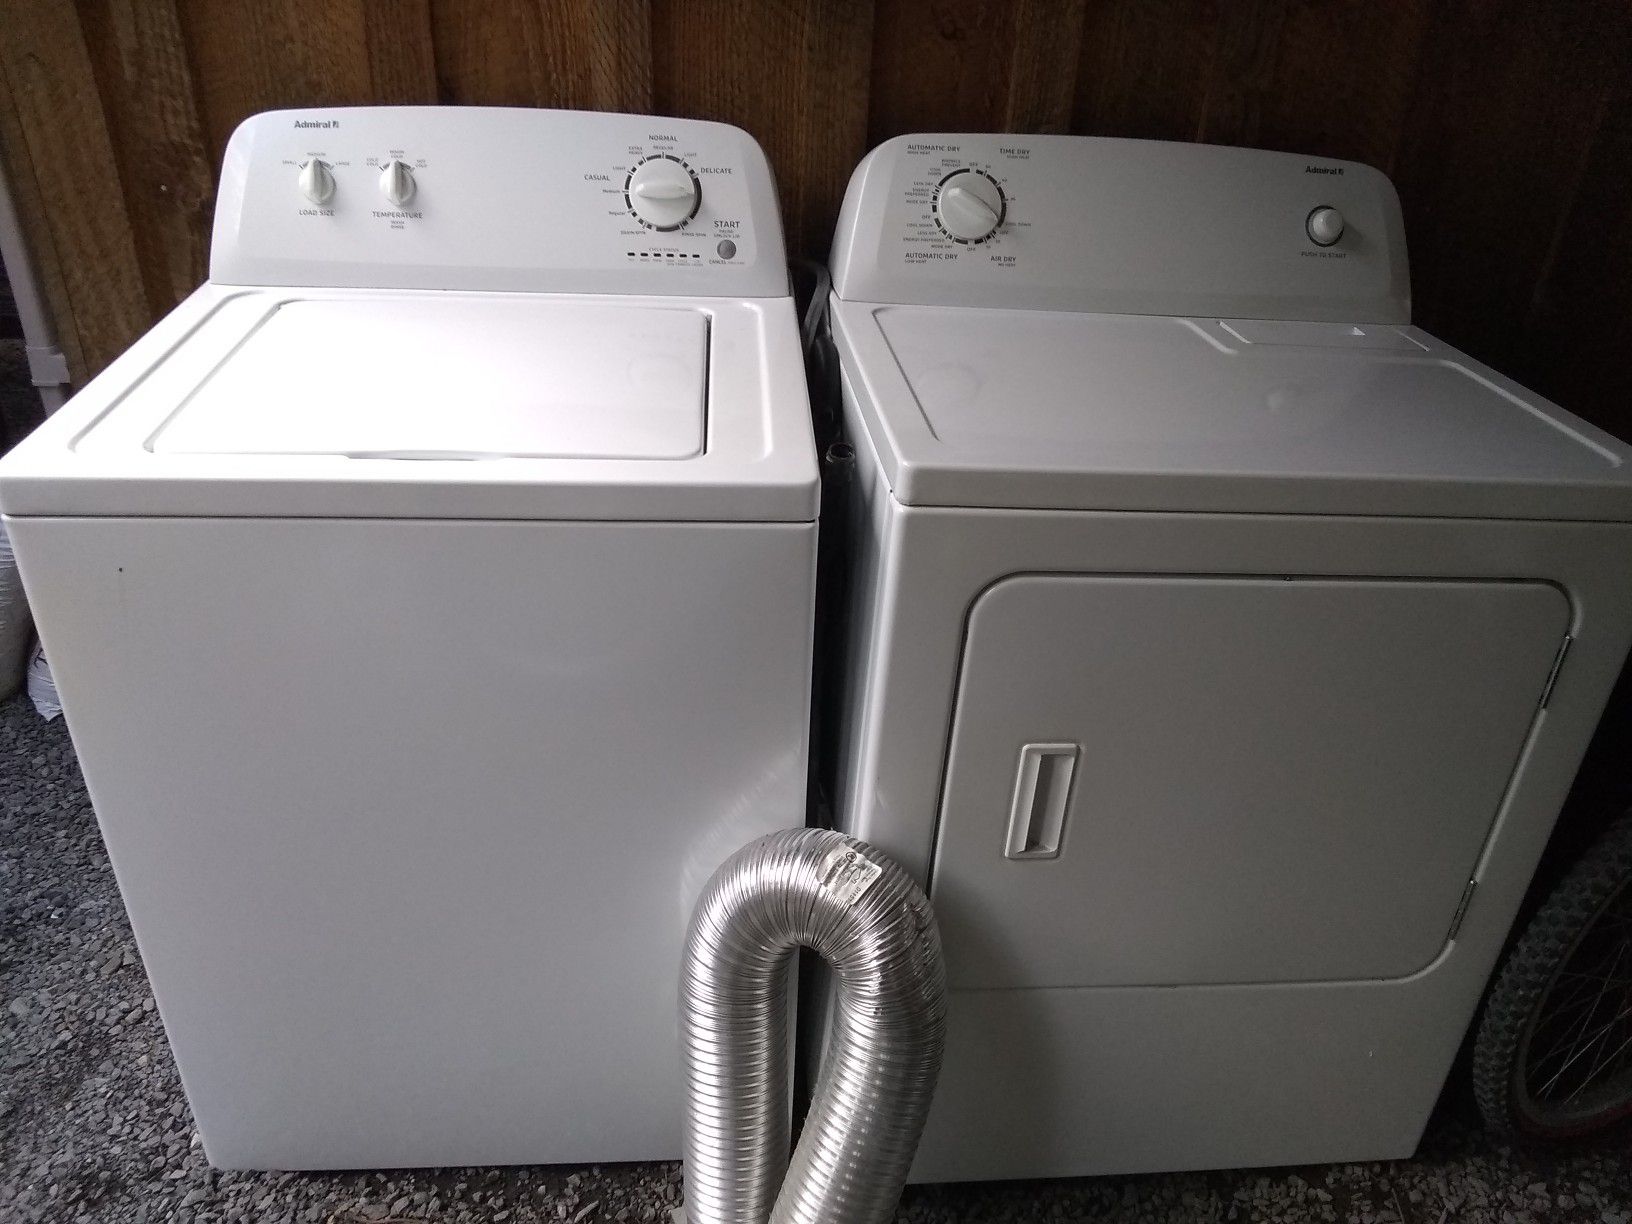 Admiral washer and dryer